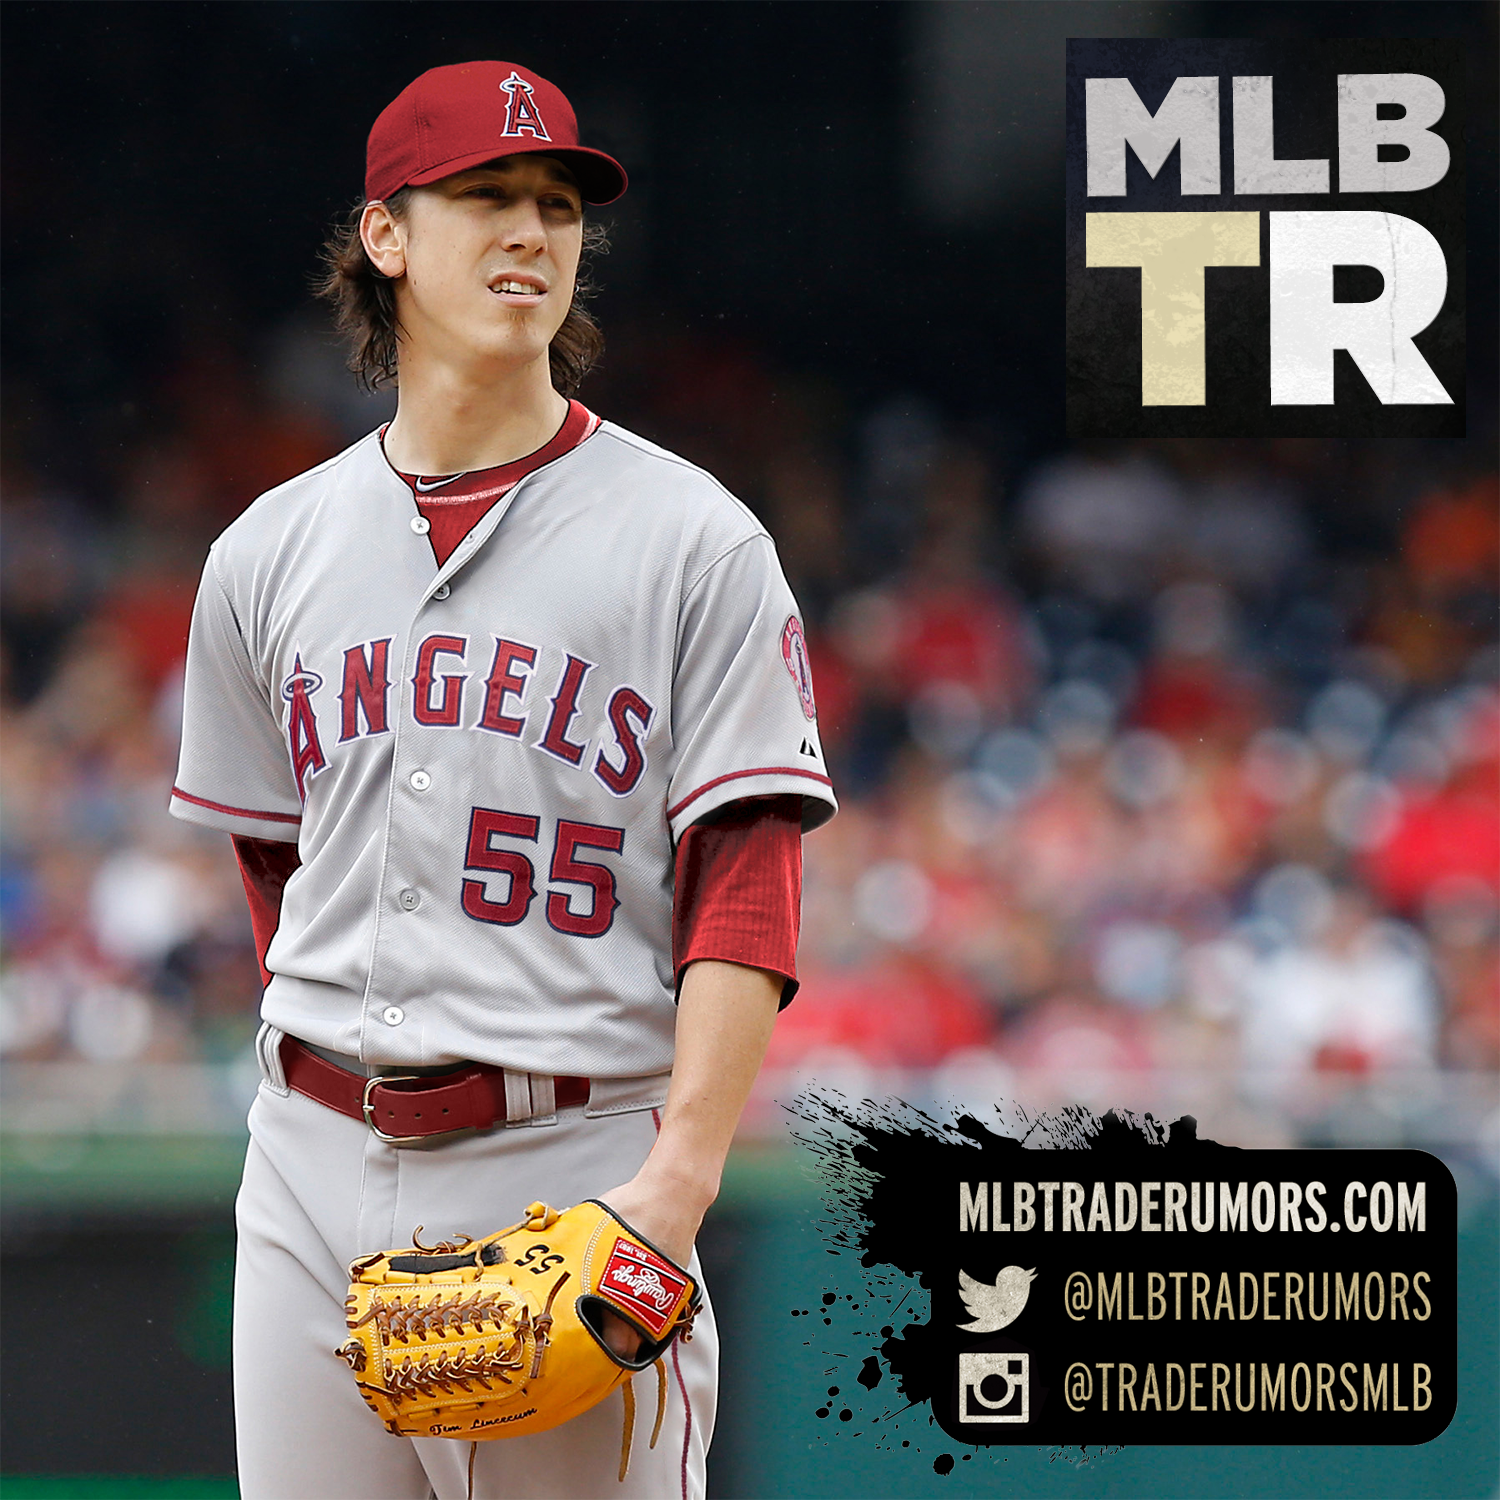 Tim Lincecum could make Angels debut in Oakland